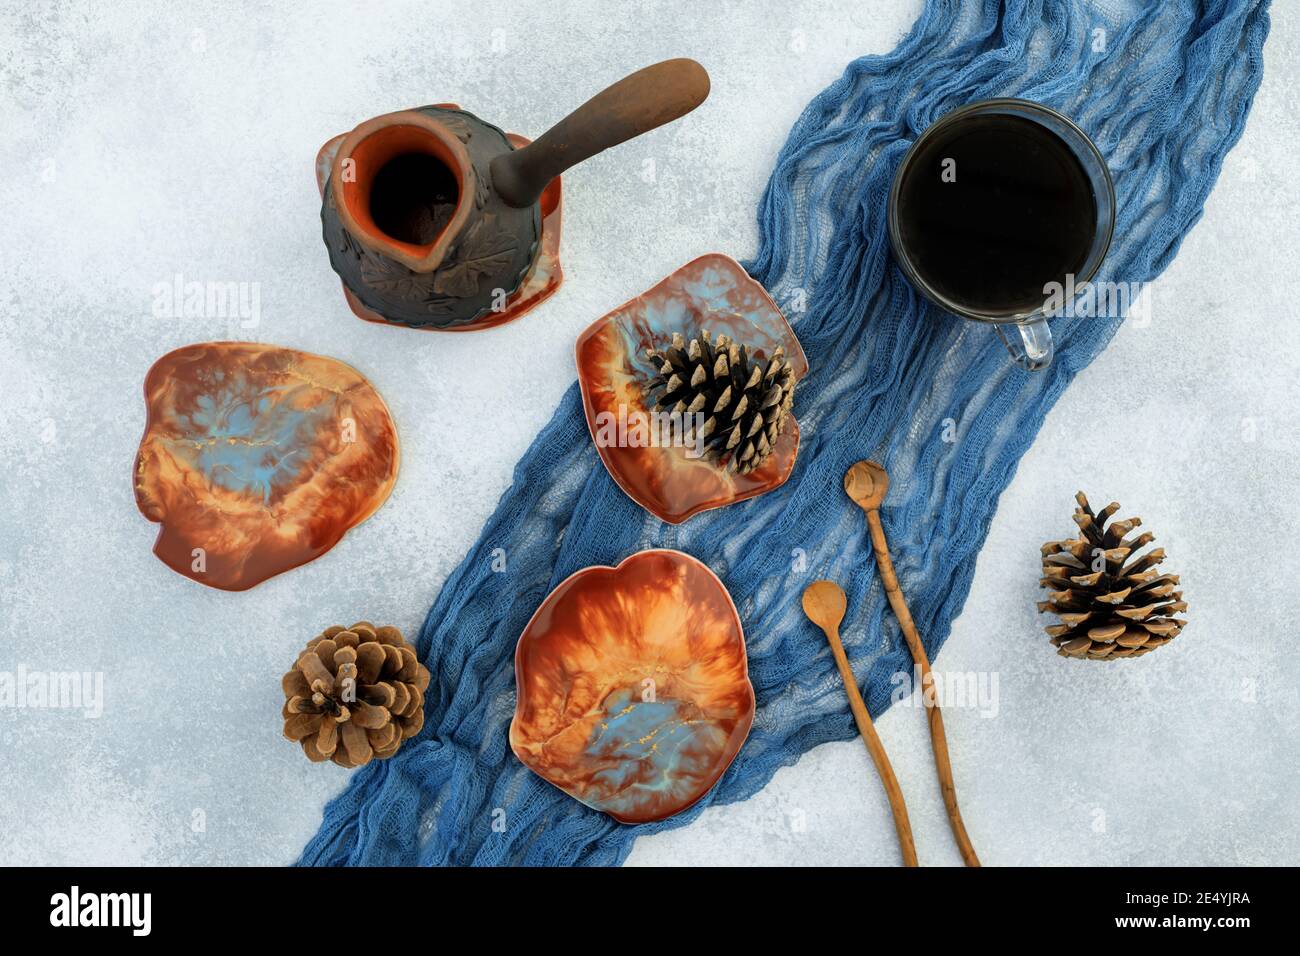 Composition with coffee cup and resin art plates on blue textile background. Flat lay, top view Stock Photo